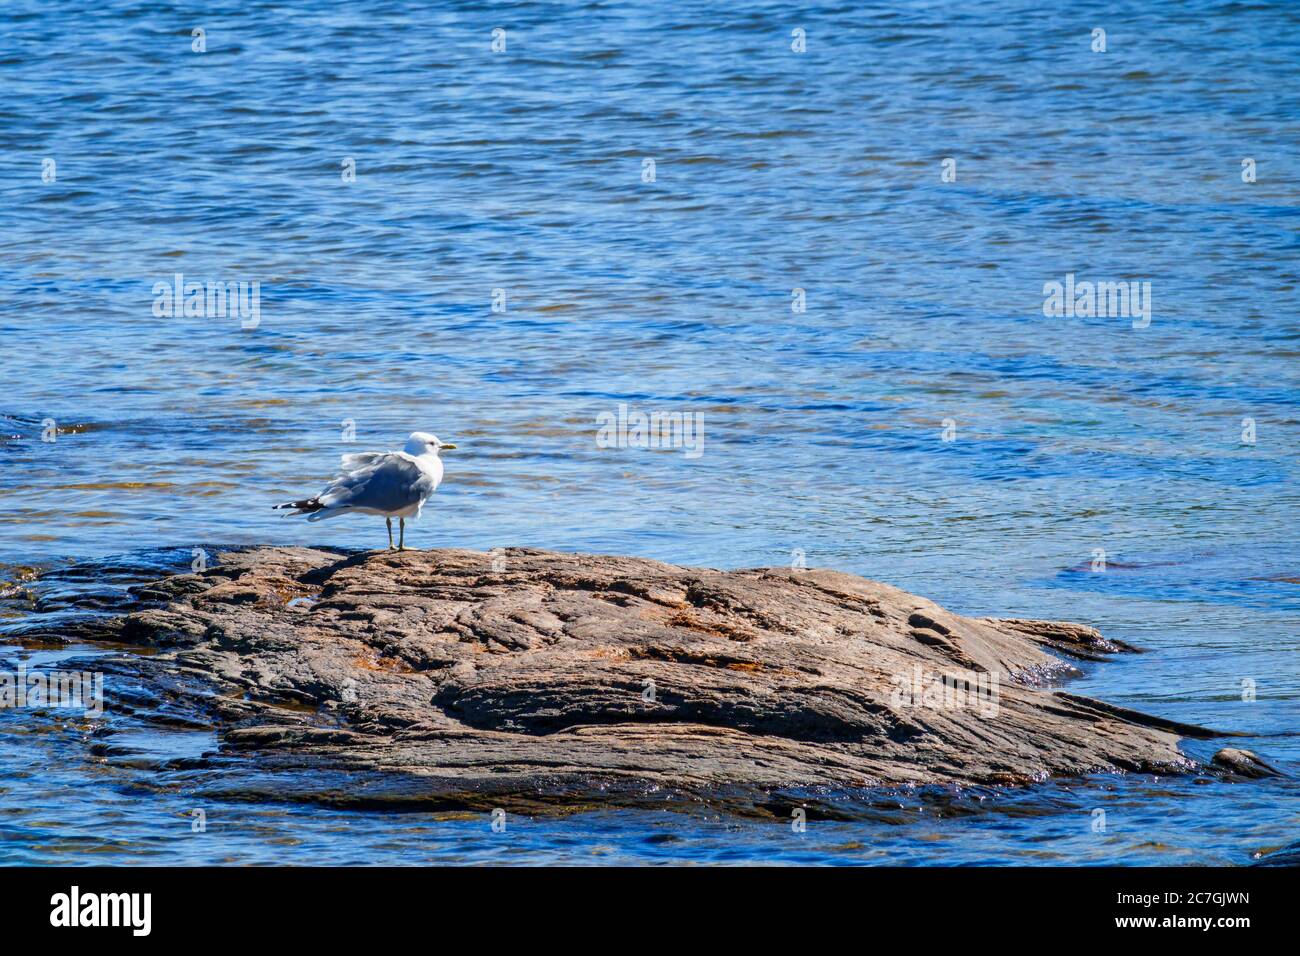 Gull at a cliff in the water Stock Photo